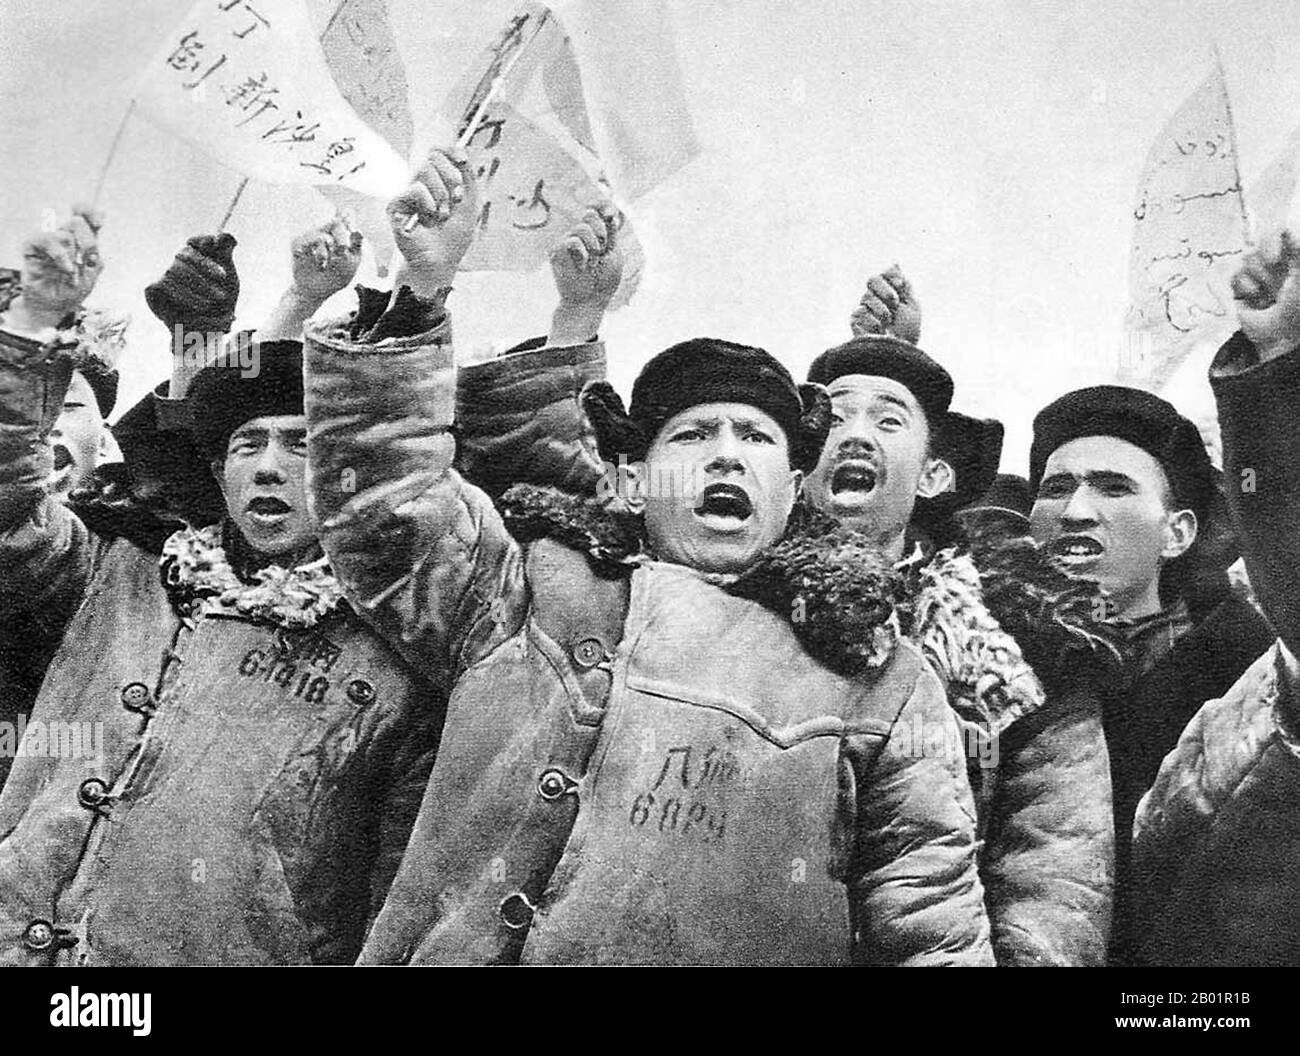 Down with the New Tsars!: Soviet Revisionists’ Anti-China Atrocities on the Heilung and Wusuli Rivers.  By March 1969, Sino–Russian border rivalries led to the Sino-Soviet border conflict at the Ussuri River and on Damansky–Zhenbao Island; more small-scale warfare occurred at Tielieketi in August. Stock Photo